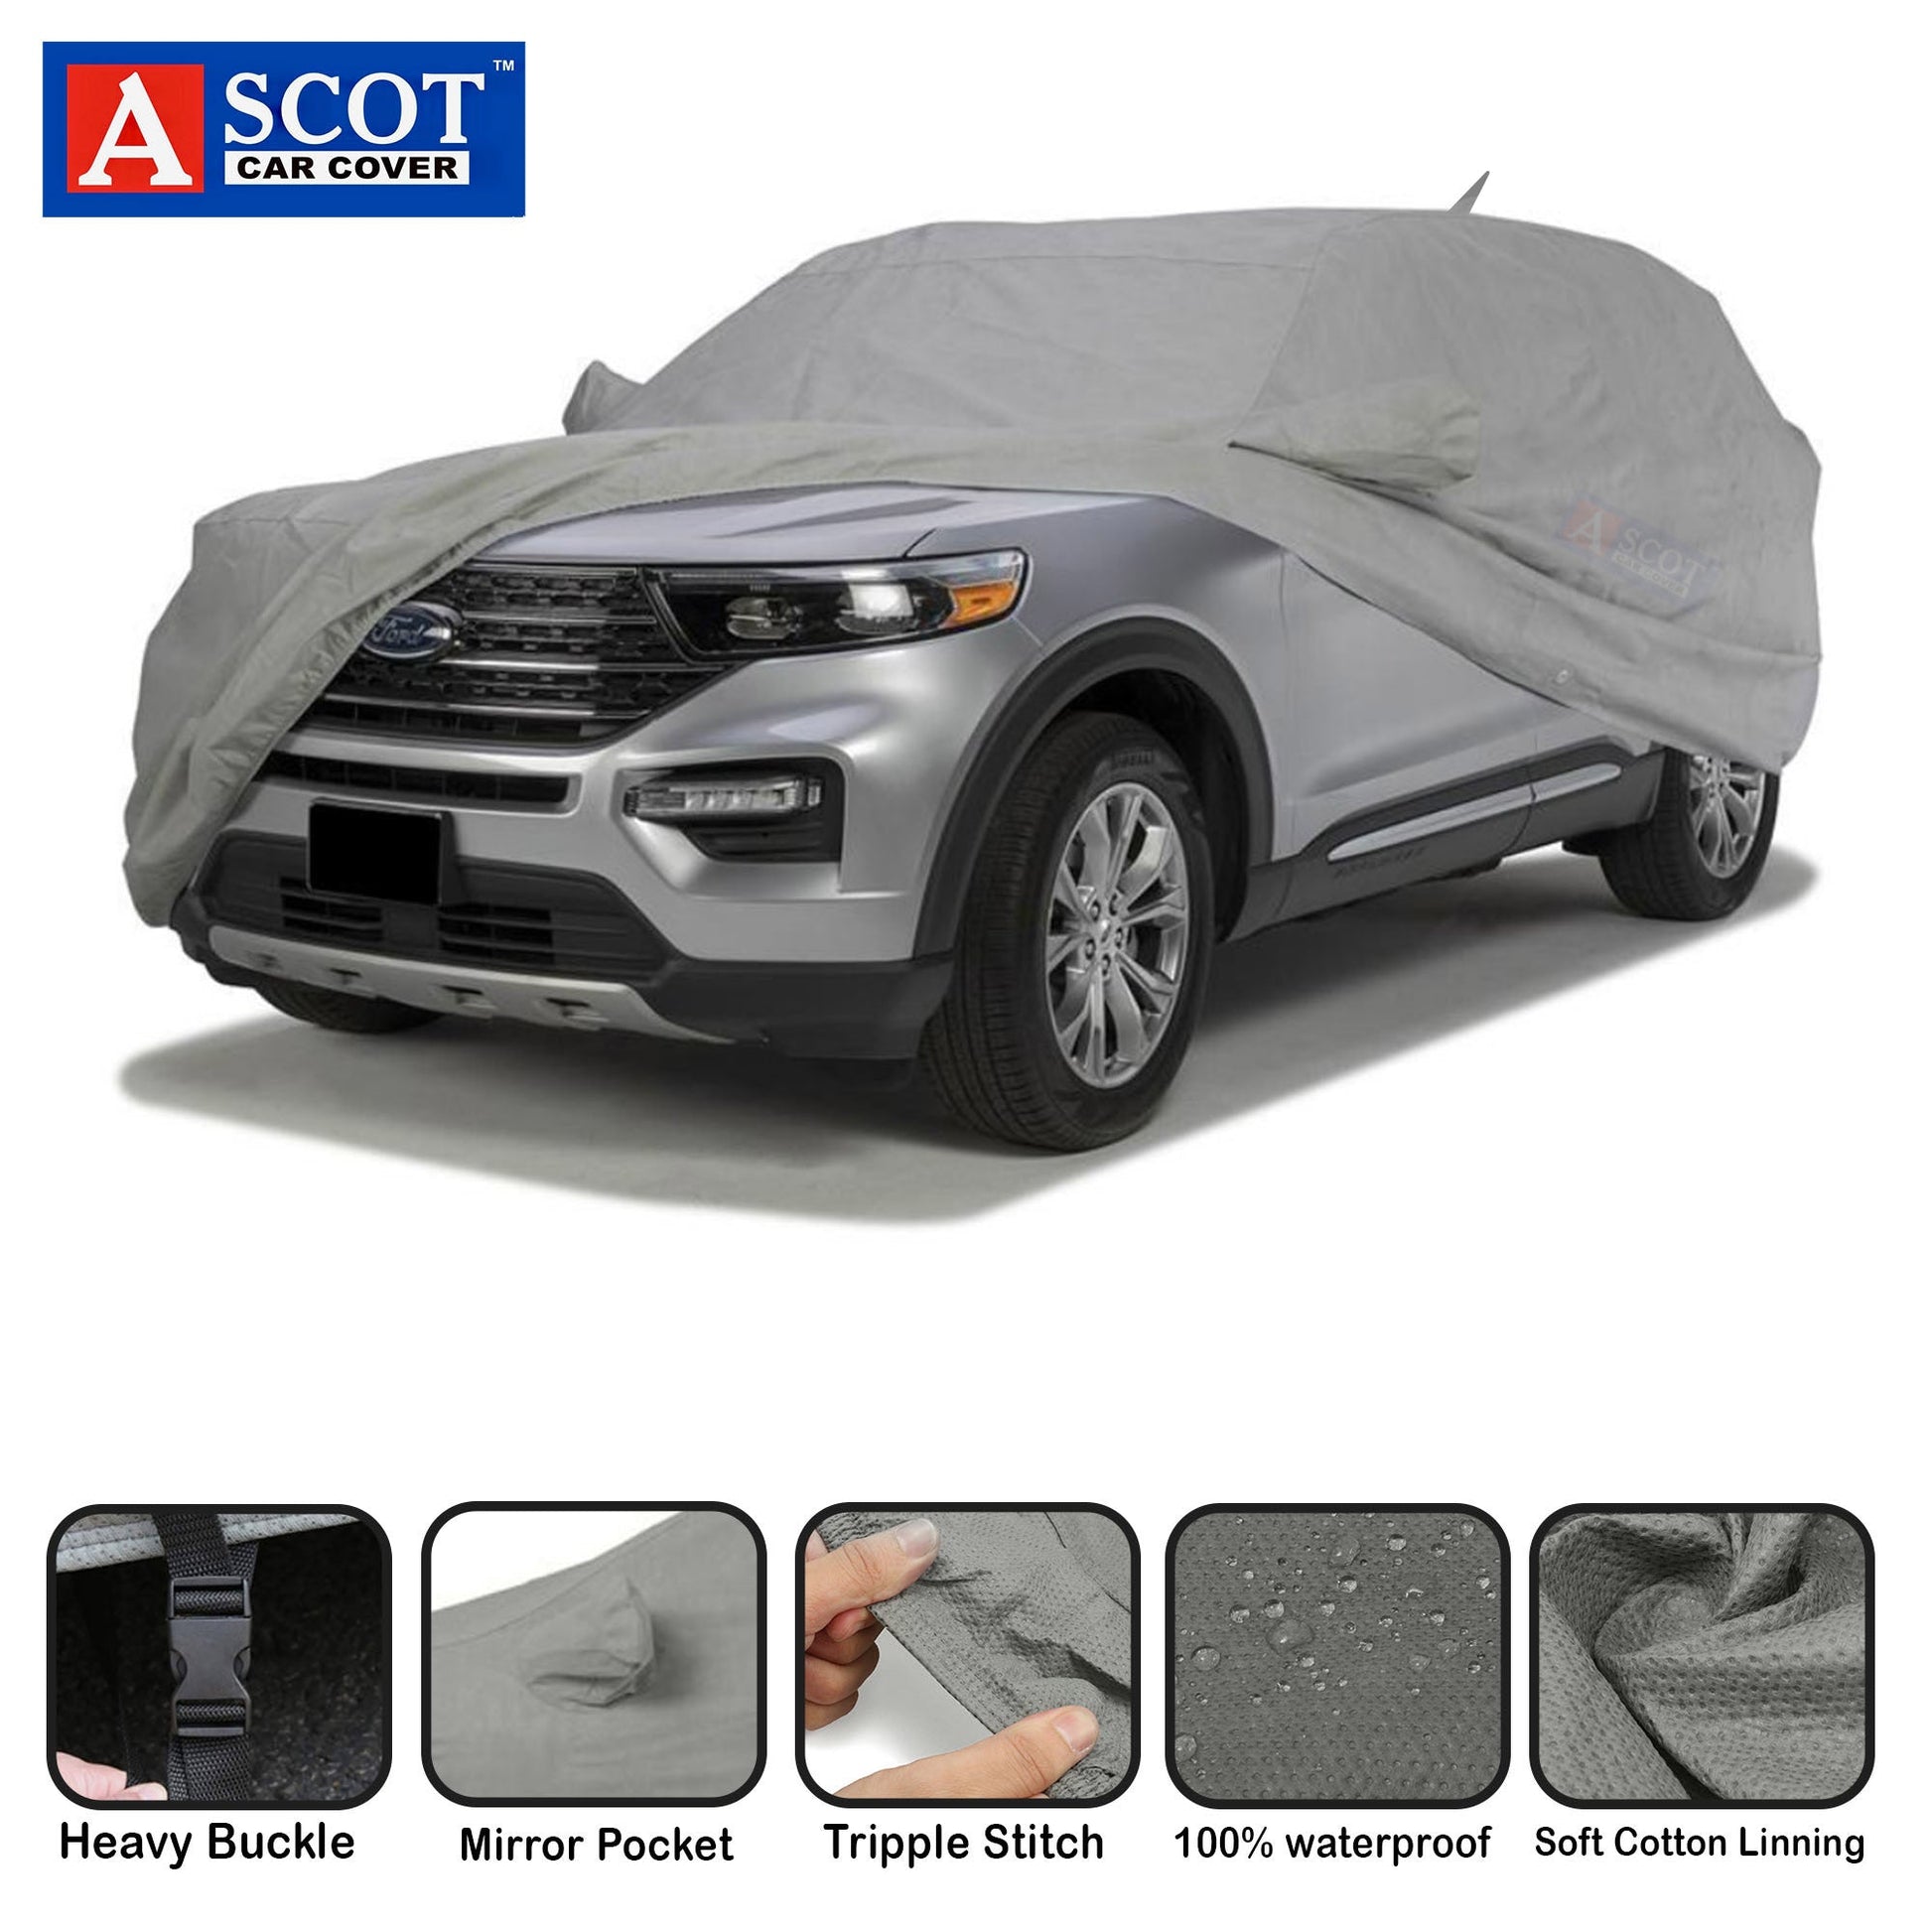 MADAFIYA Royals Choice Car Body Cover Compatible with MG ZS EV car Cover, Water Resistant car Cover, Triple Stitched, Protection from  Rain,Snow,UV,Dust